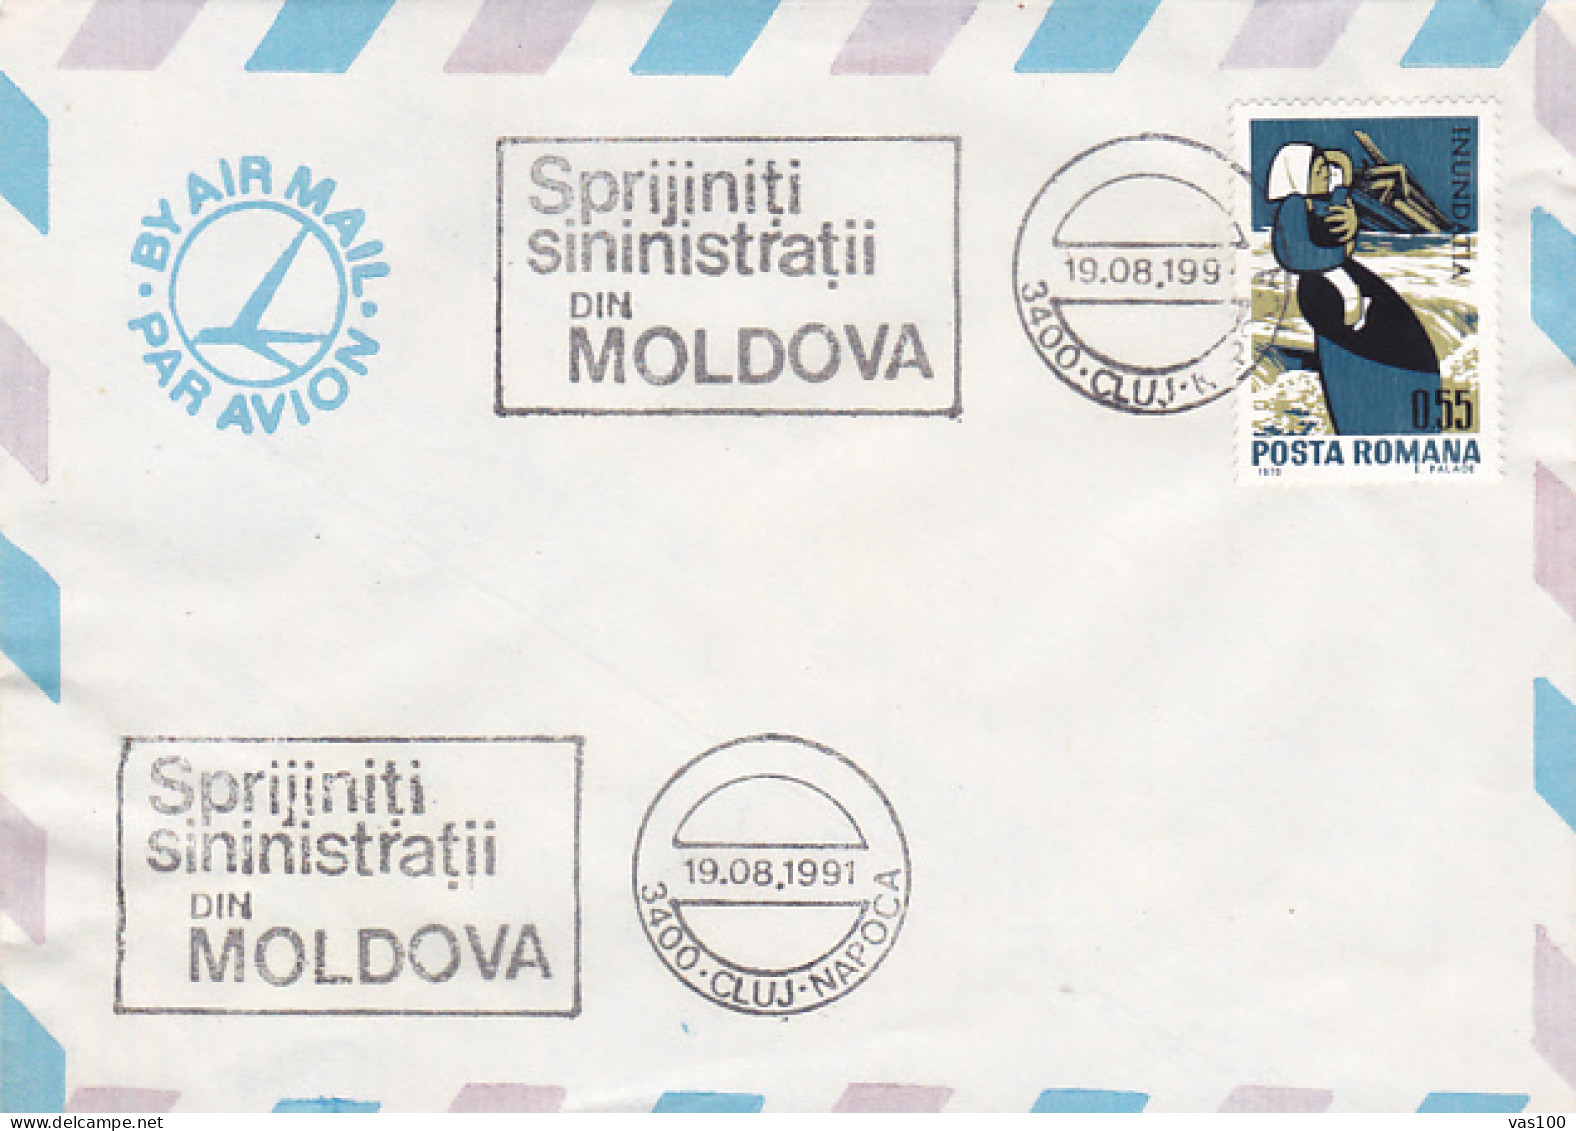 HELS FLOOD VICTIMS CAMPAIGN, SPECIAL POSTMARKS AND STAMP ON COVER, 1991, ROMANIA - Cartas & Documentos